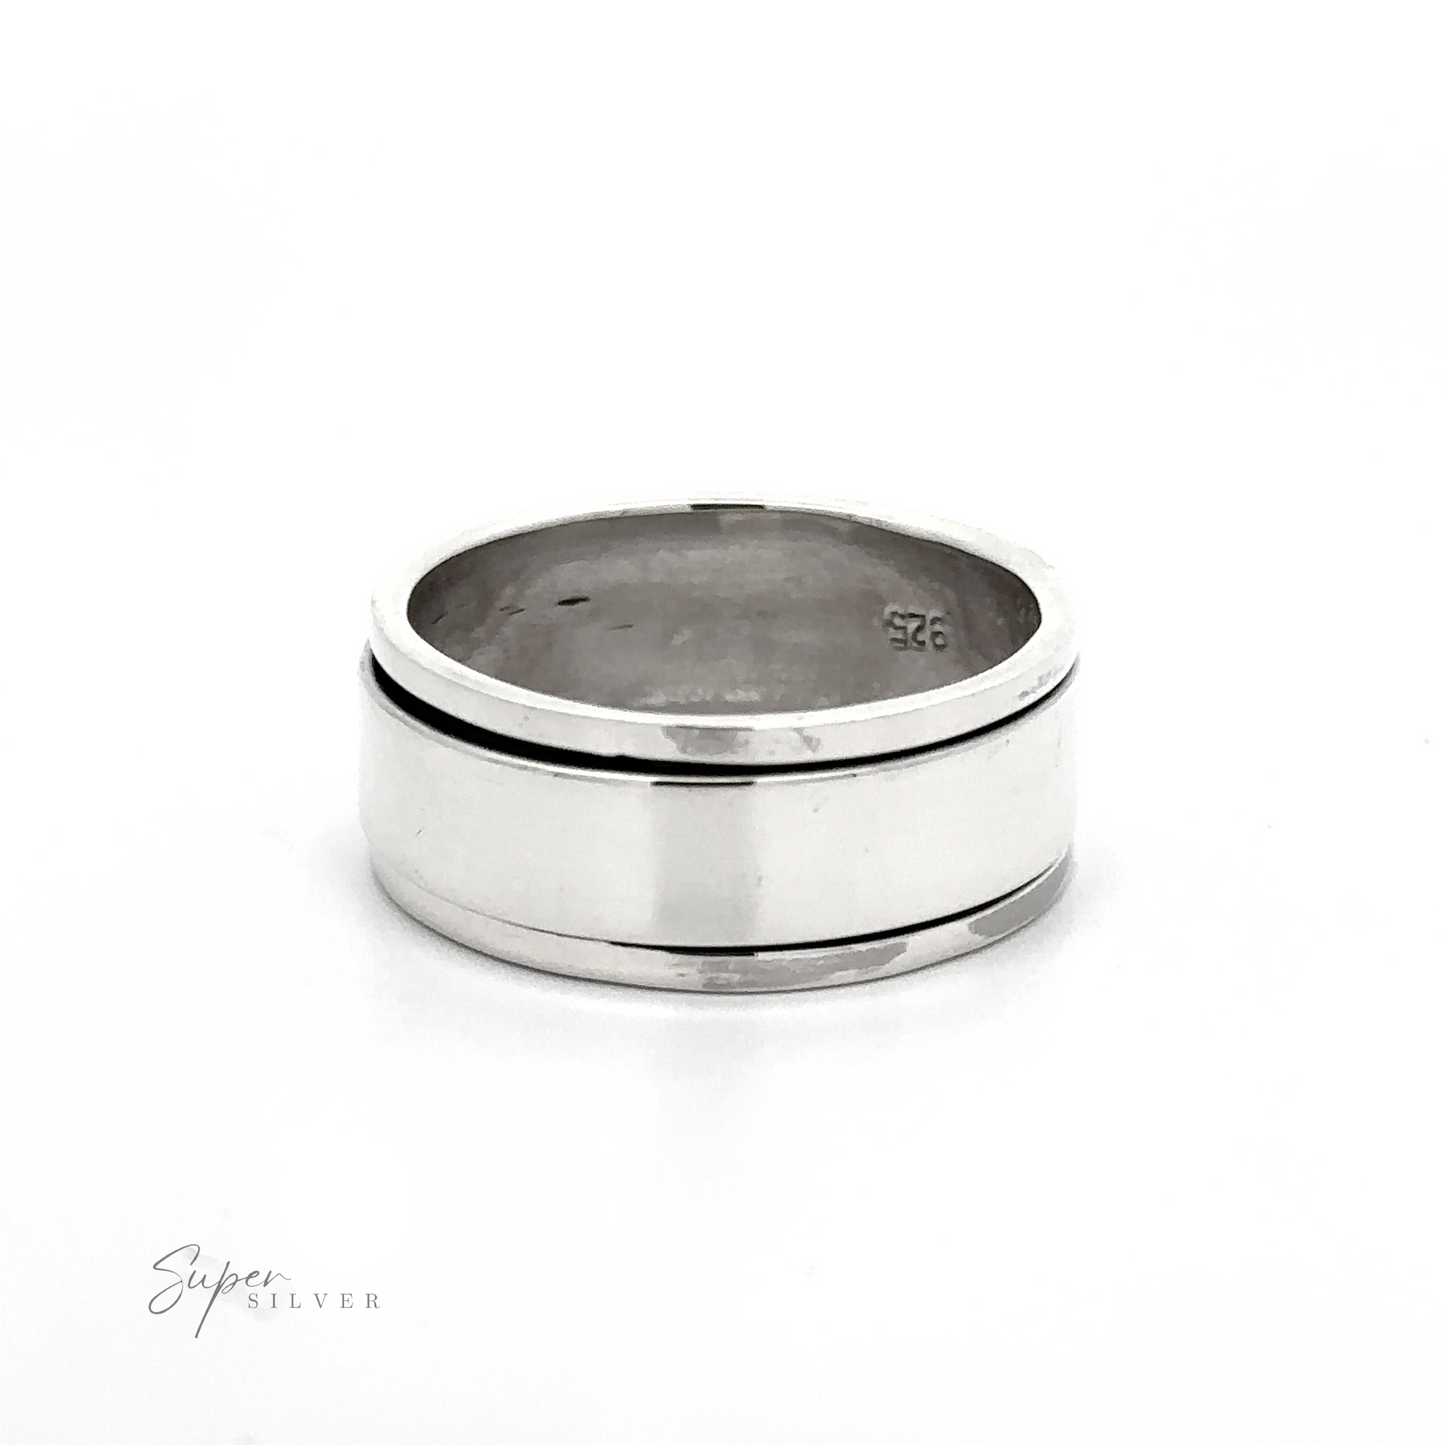 A Simple Silver Spinner Band with a classic look on a white background.